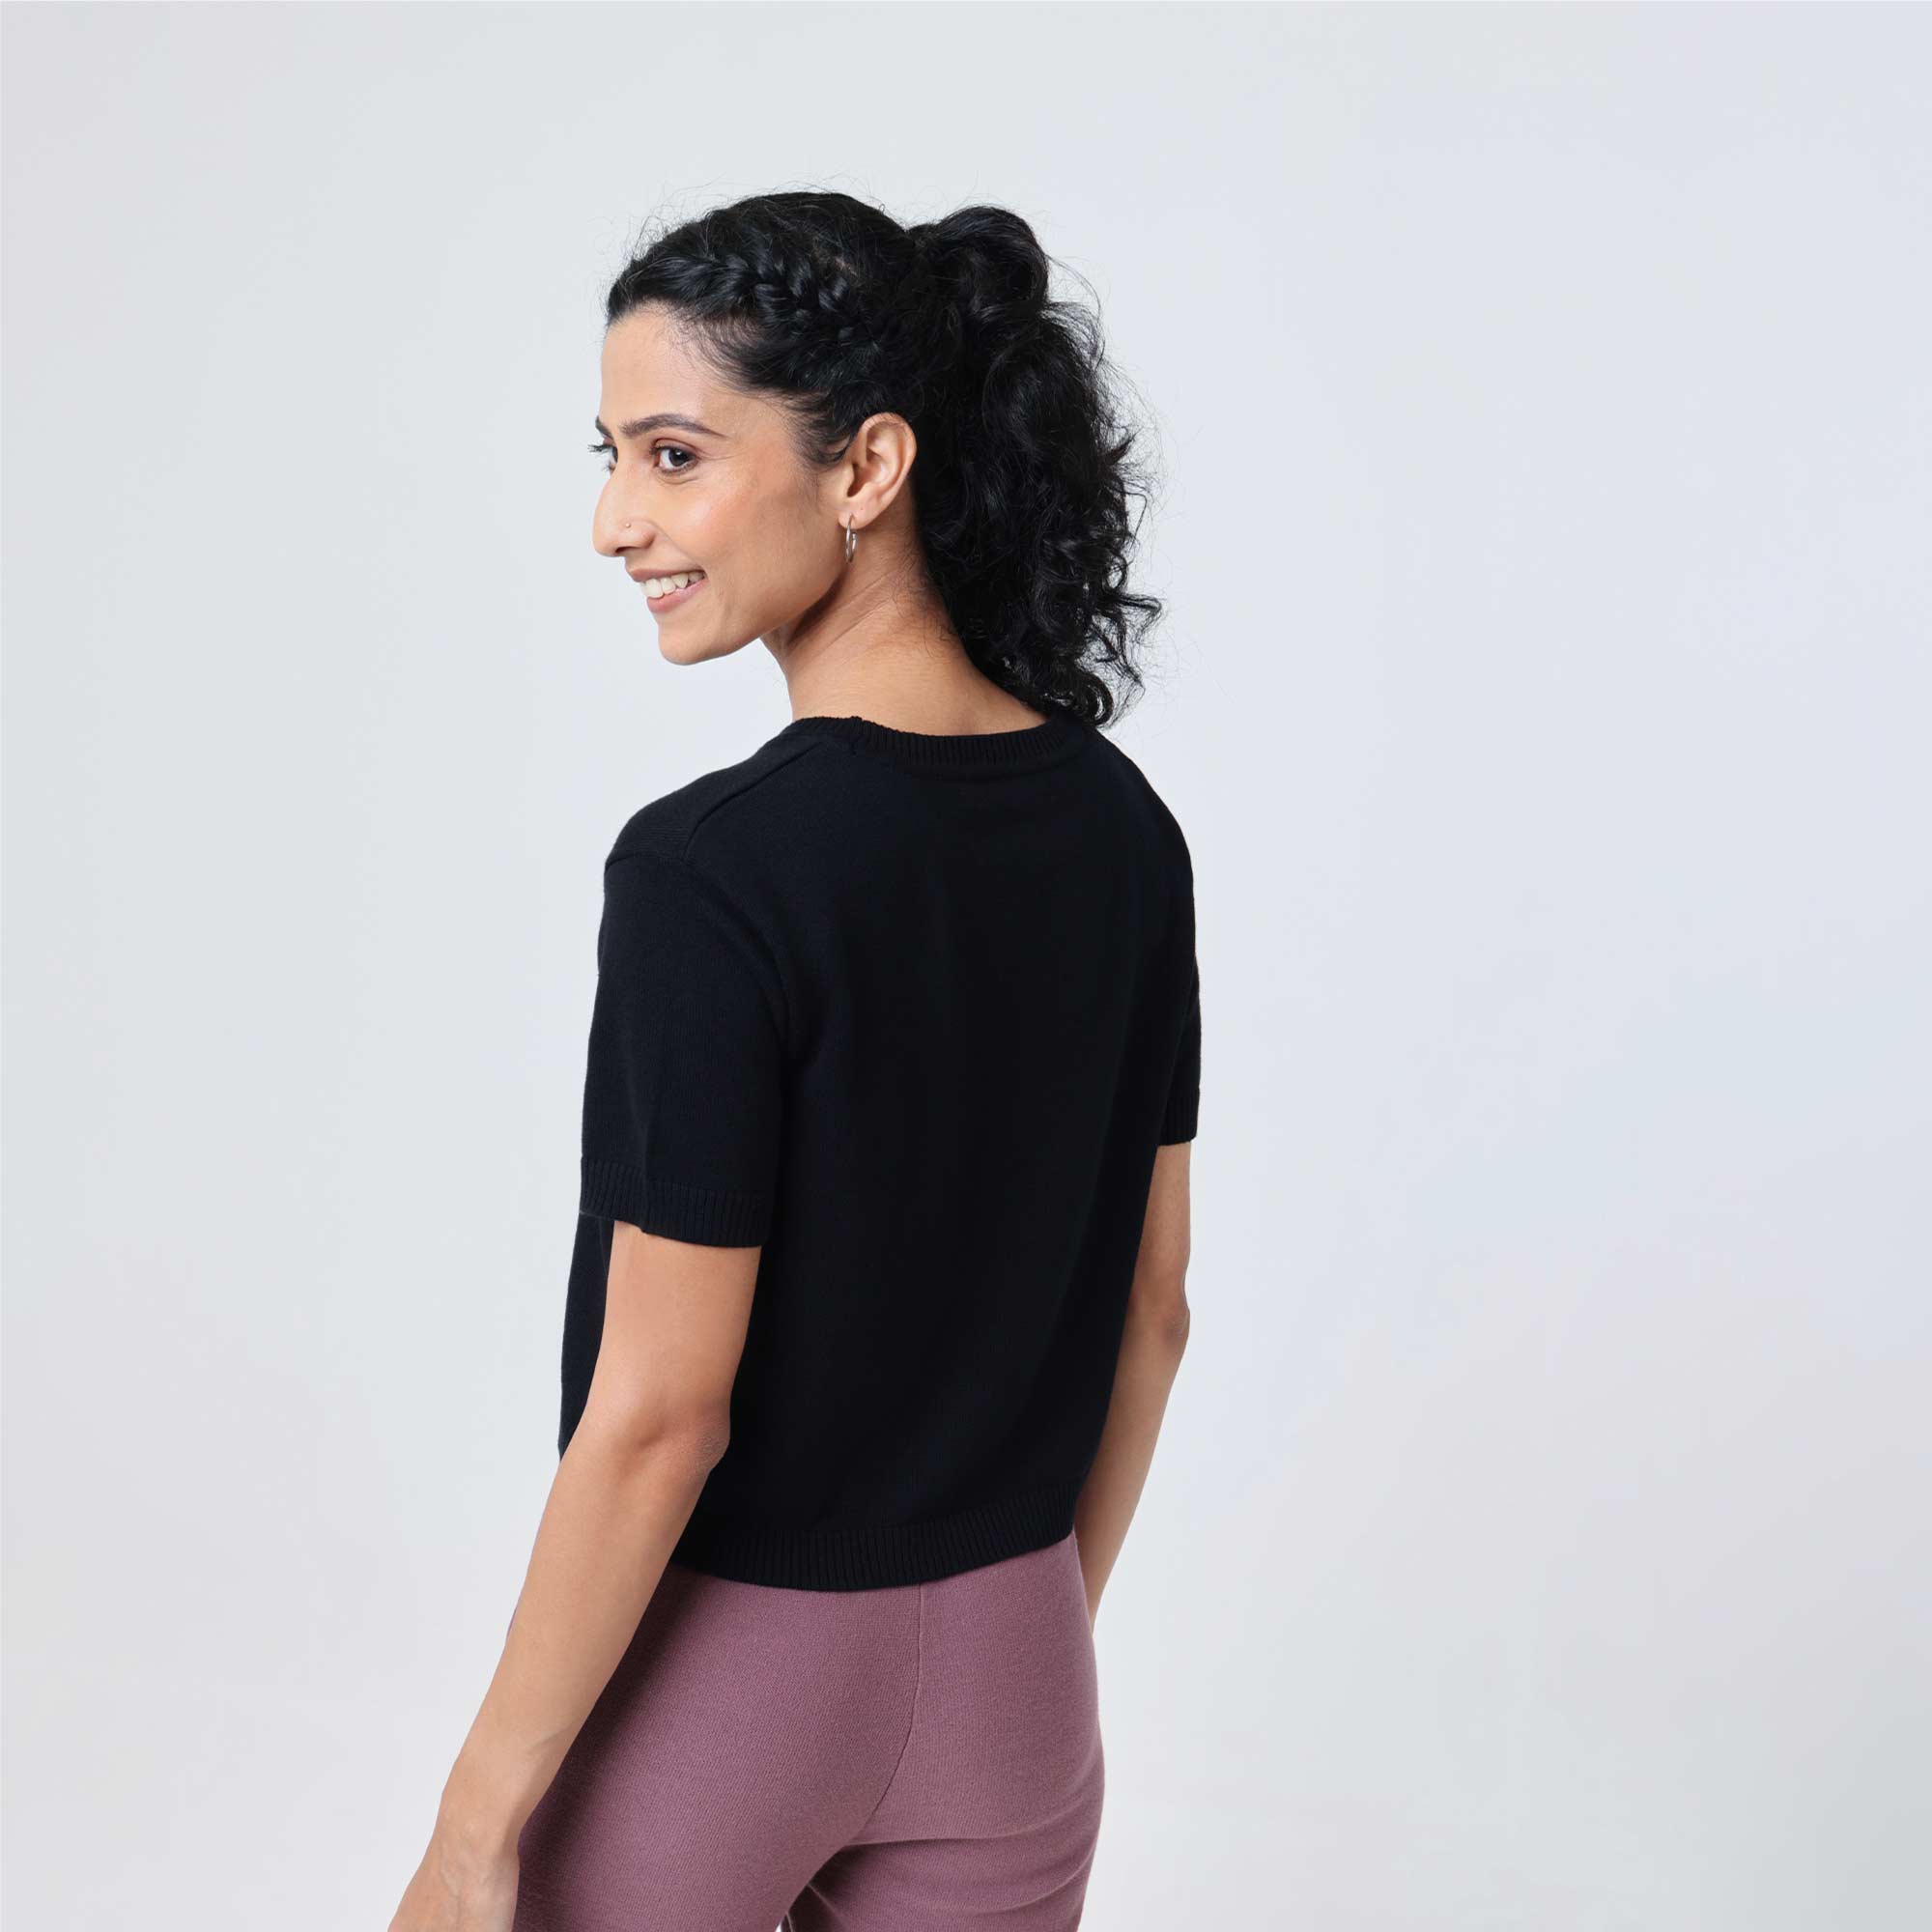 At-Ease Cotton Knit Crop Top